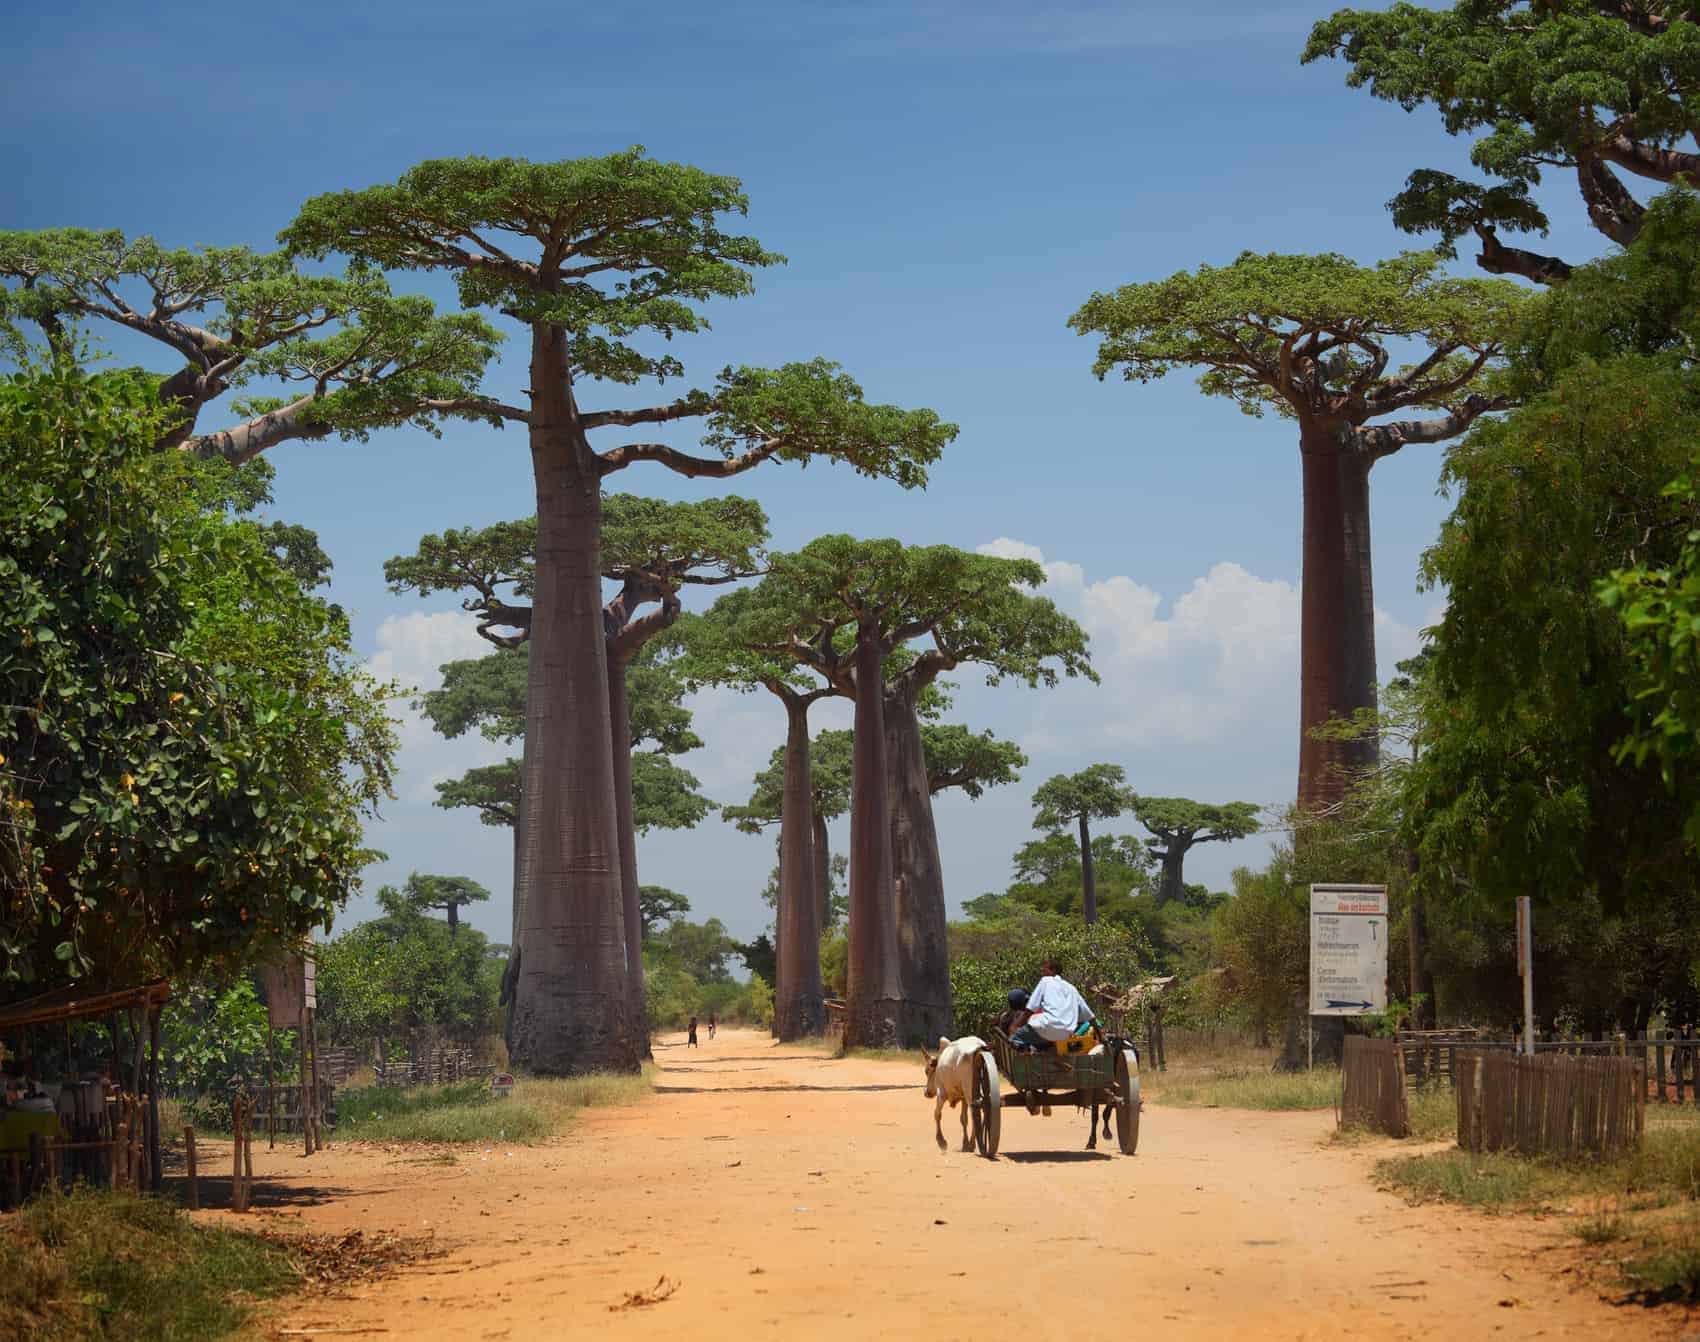 Baobabs and rural road in Africa at sunny day. Madagascar